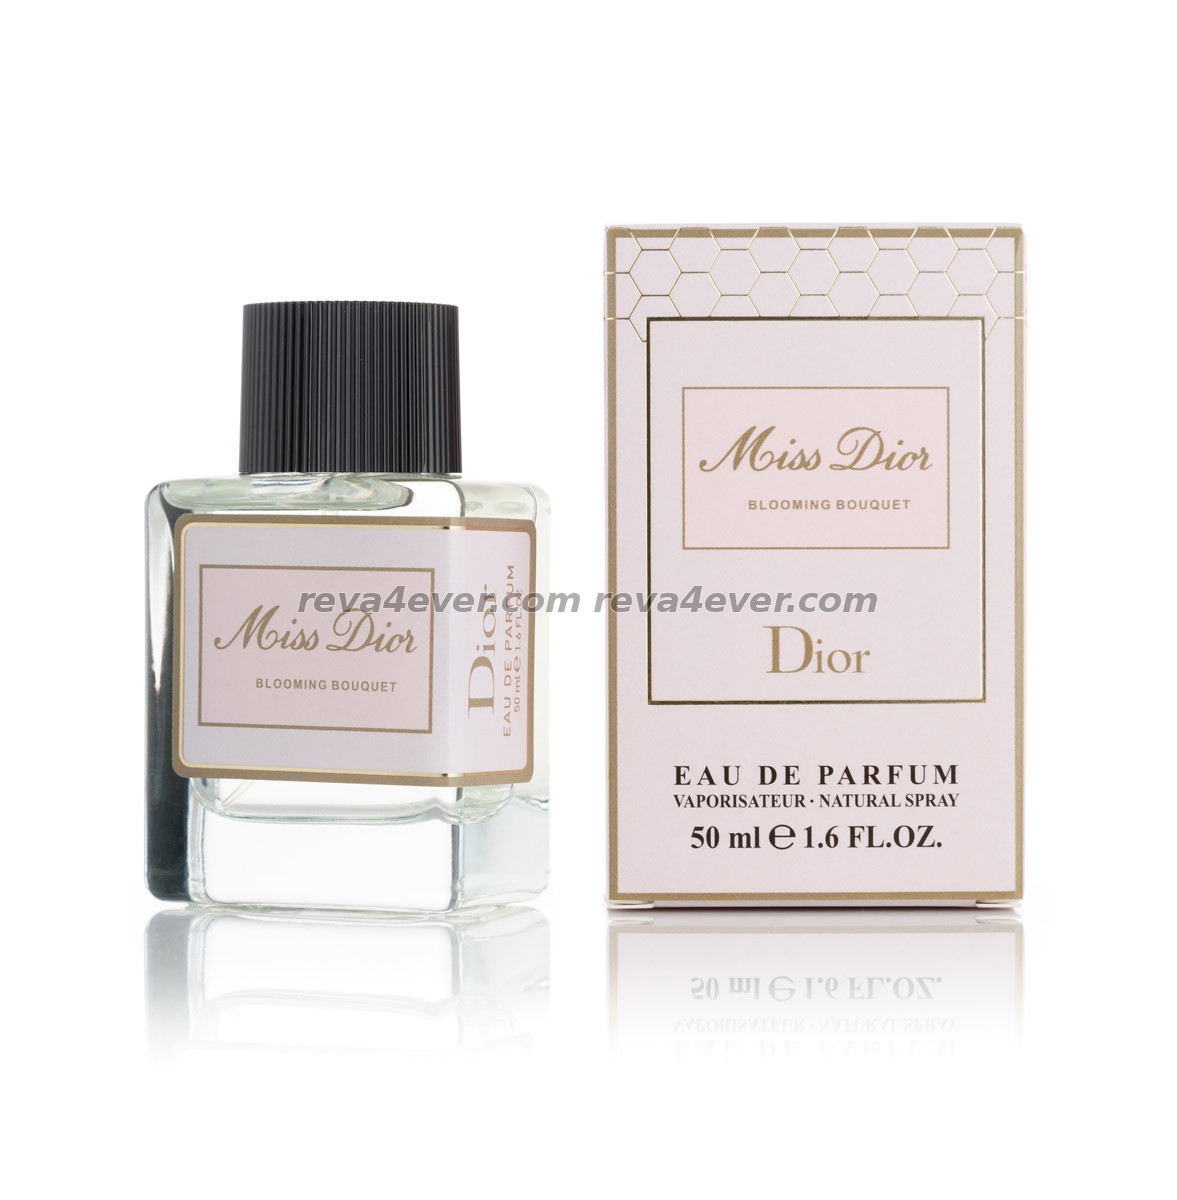 Christian Dior Miss Dior Cherie Blooming Bouquet edp 50 ml color box